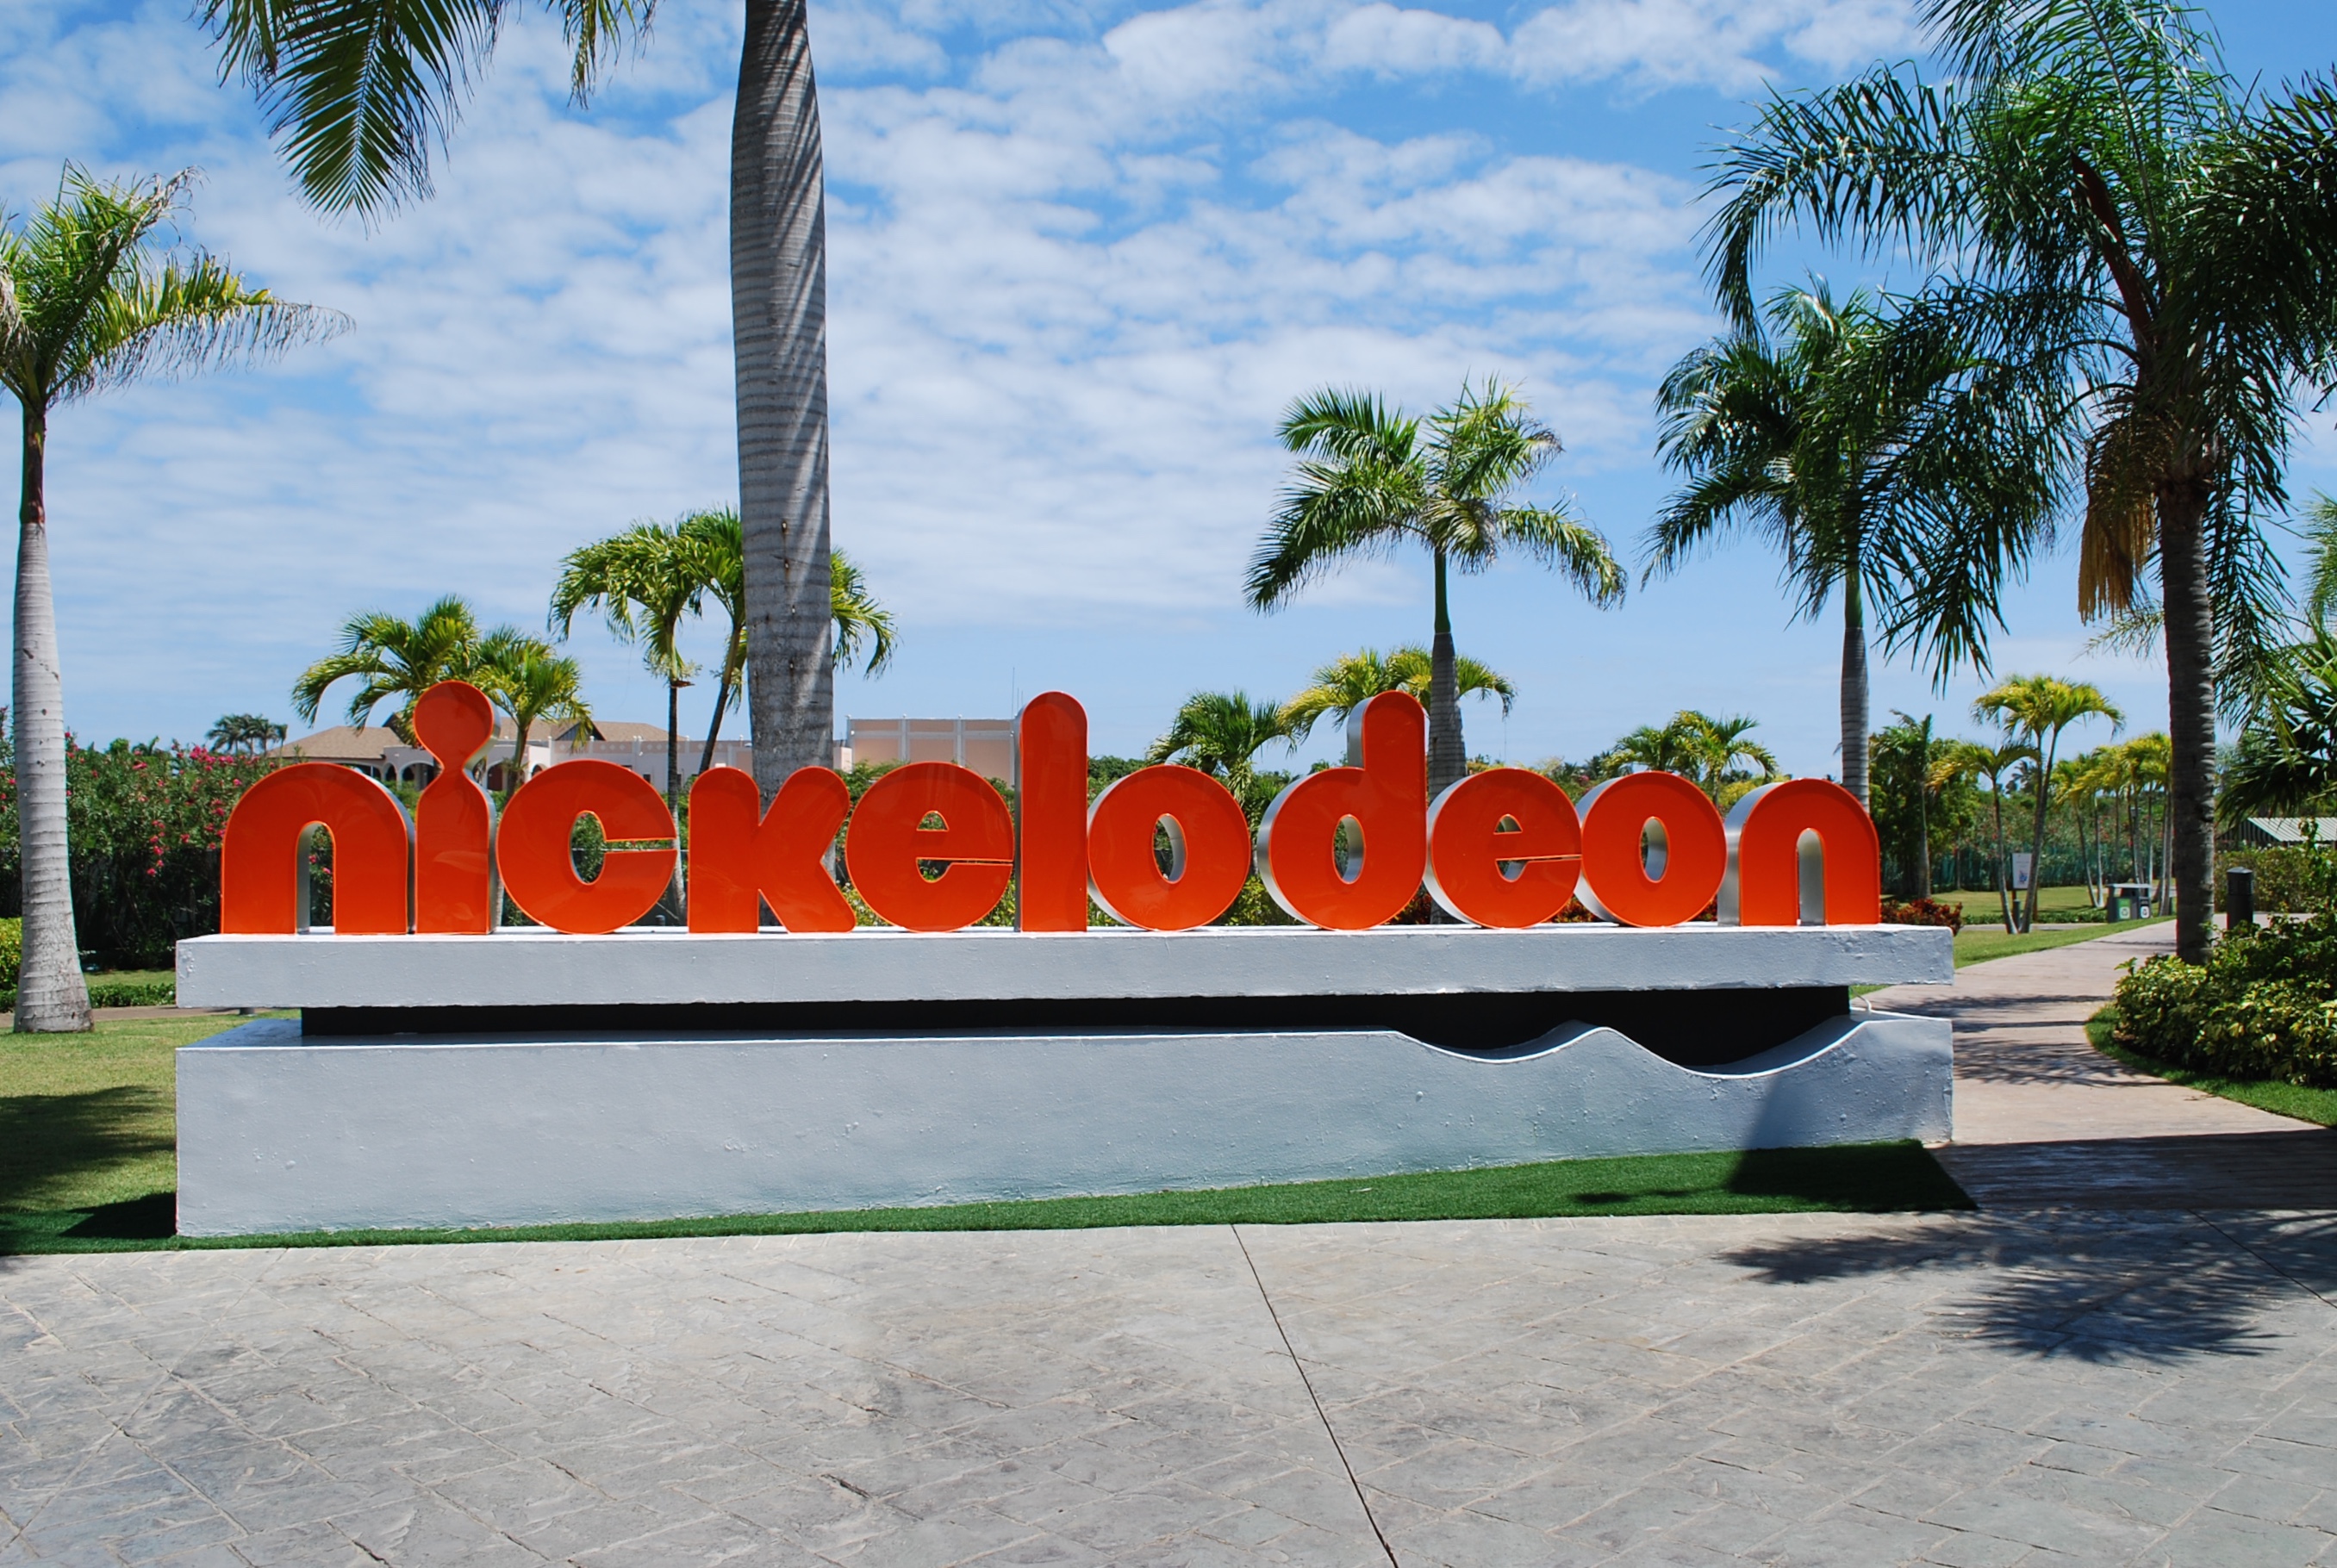 Visiting The Nickelodeon Resort In Punta Cana With Kids